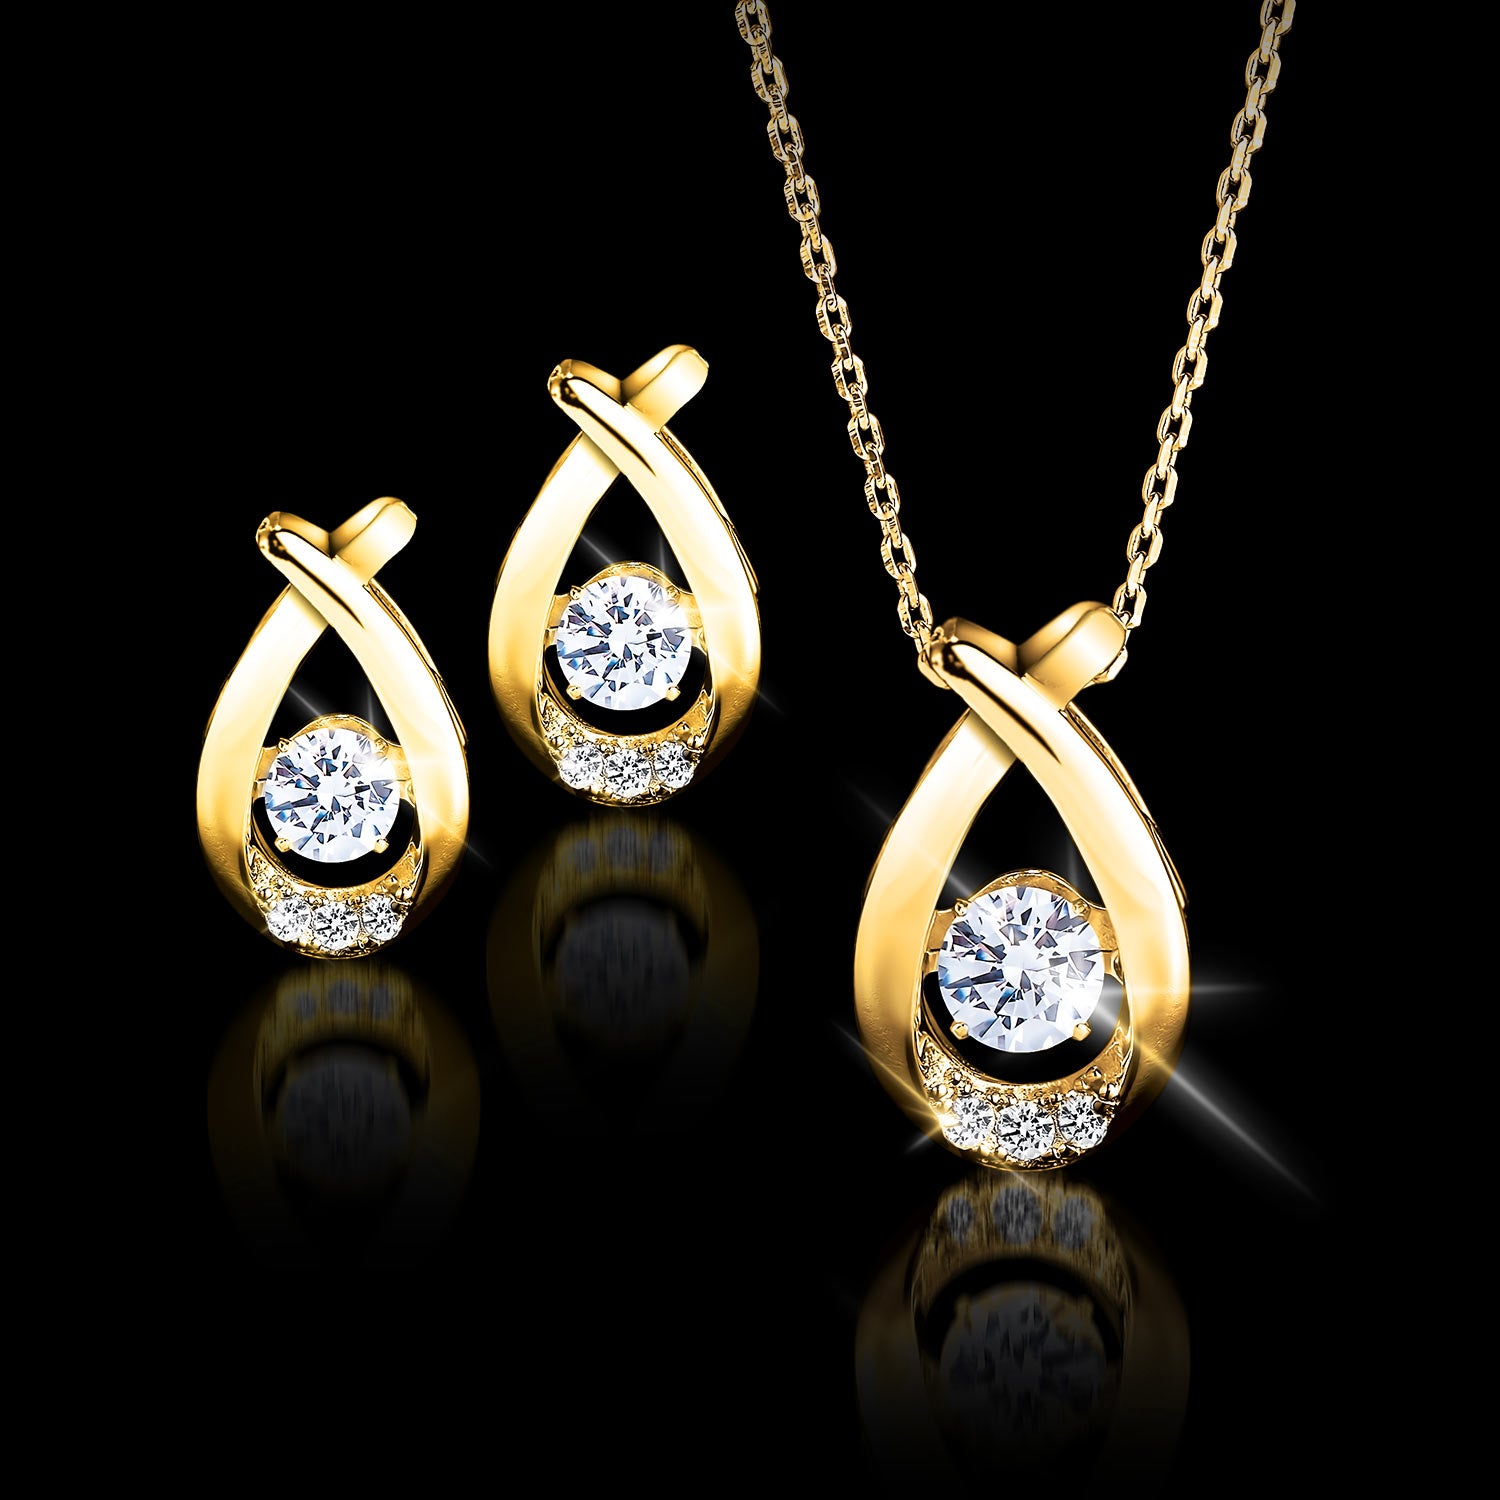 'Dancing' Jewelry Gold Collection | Timepieces International